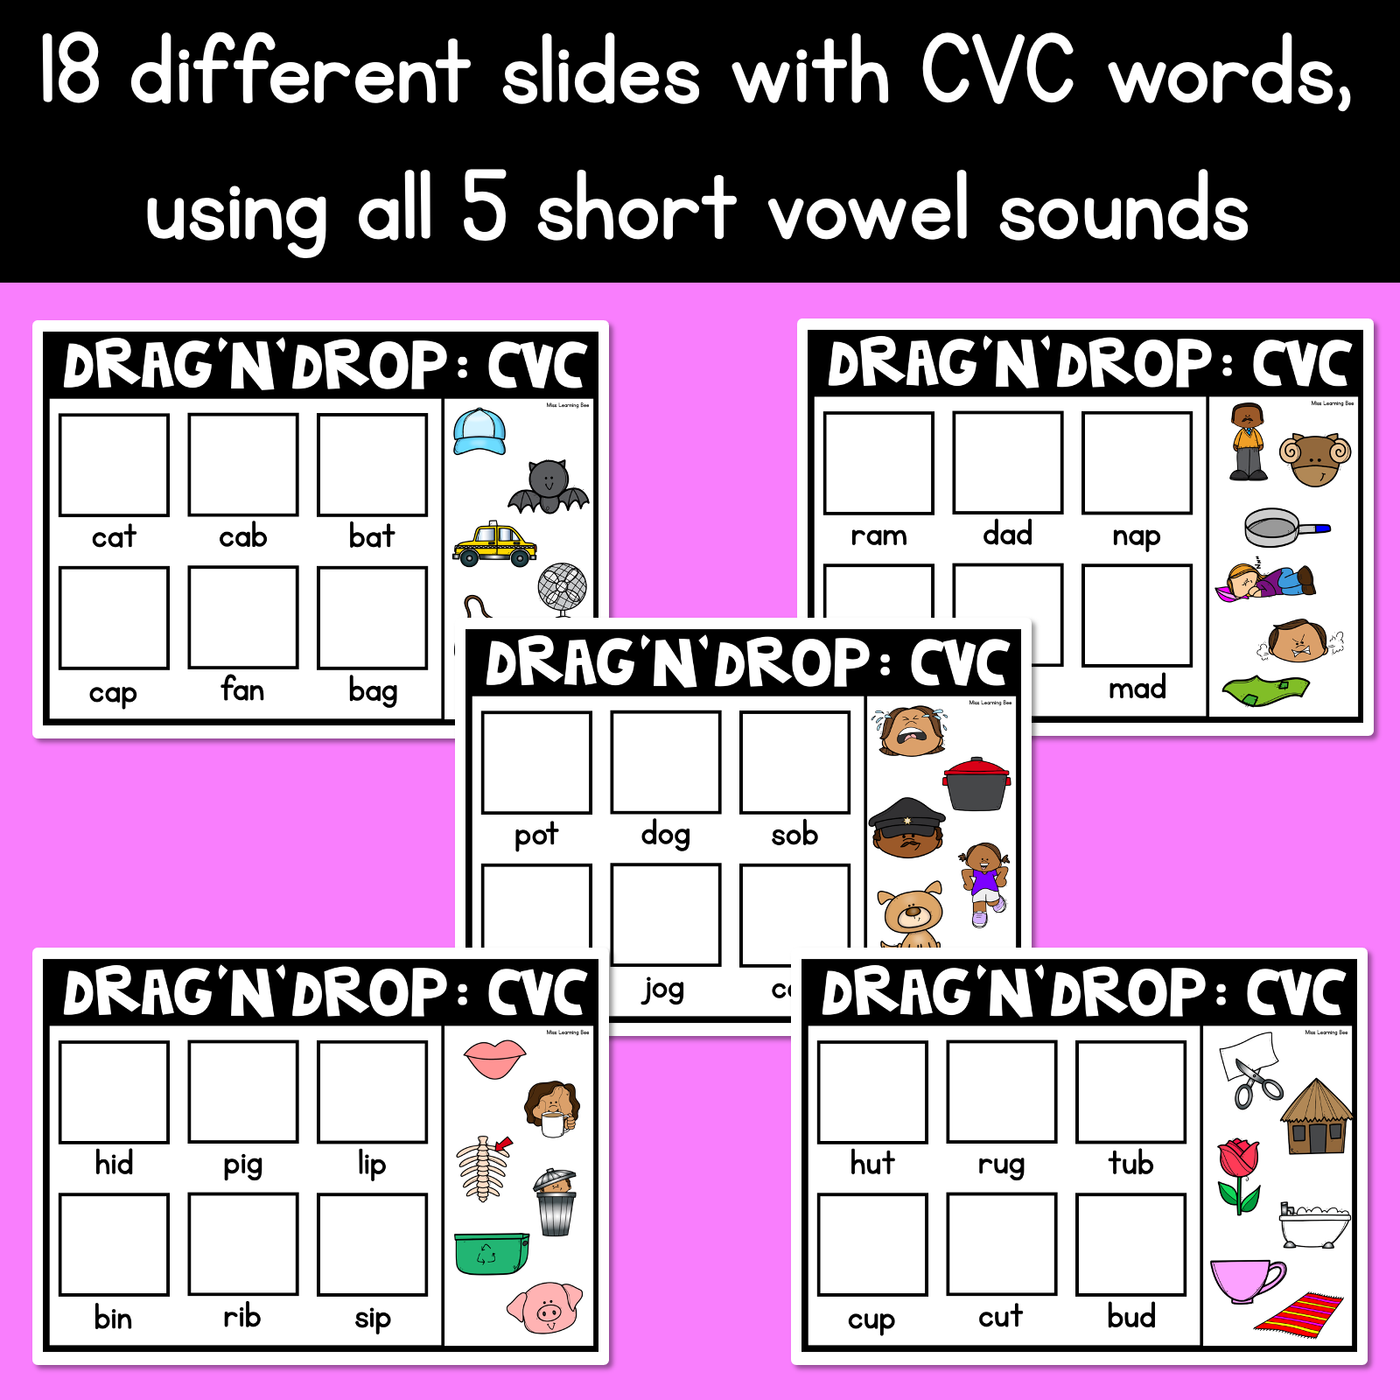 DRAG AND DROP THE CVC WORD | PowerPoint